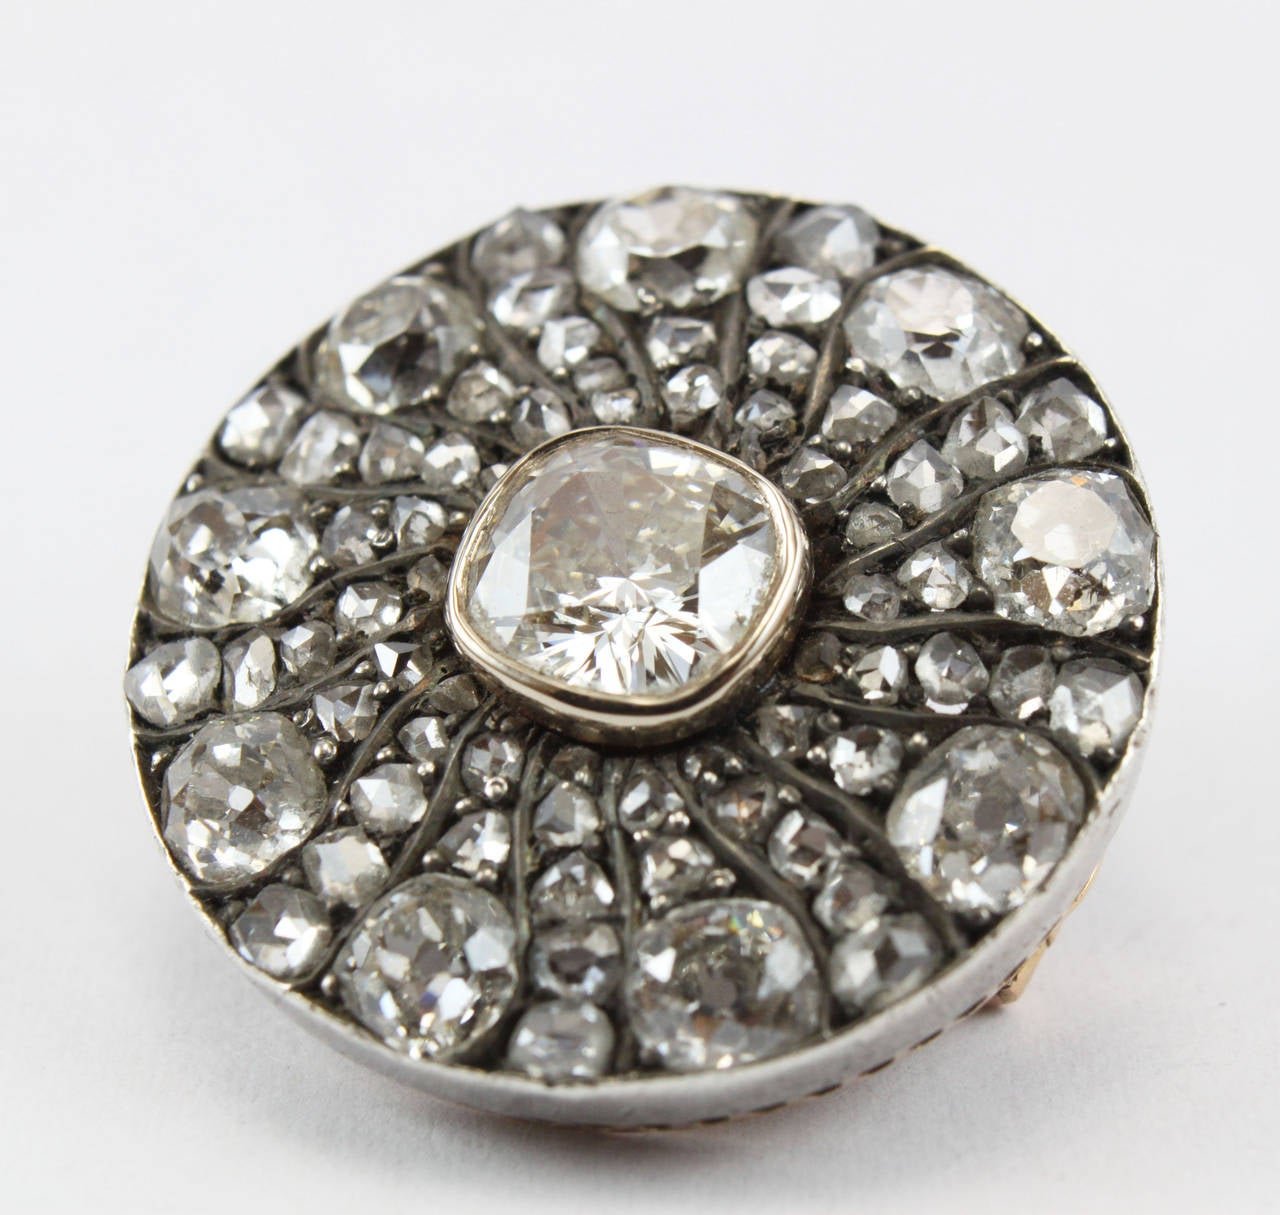 Victorian diamond brooch with a circular design and set with old cut and rosecut diamonds, 1880s. The centre diamond weighs ca. 1.6ct and is of K-L colour and VVS2-VS1 clarity. The remaining 9 old cut diamonds weigh a total of ca. 3cts. The brooch